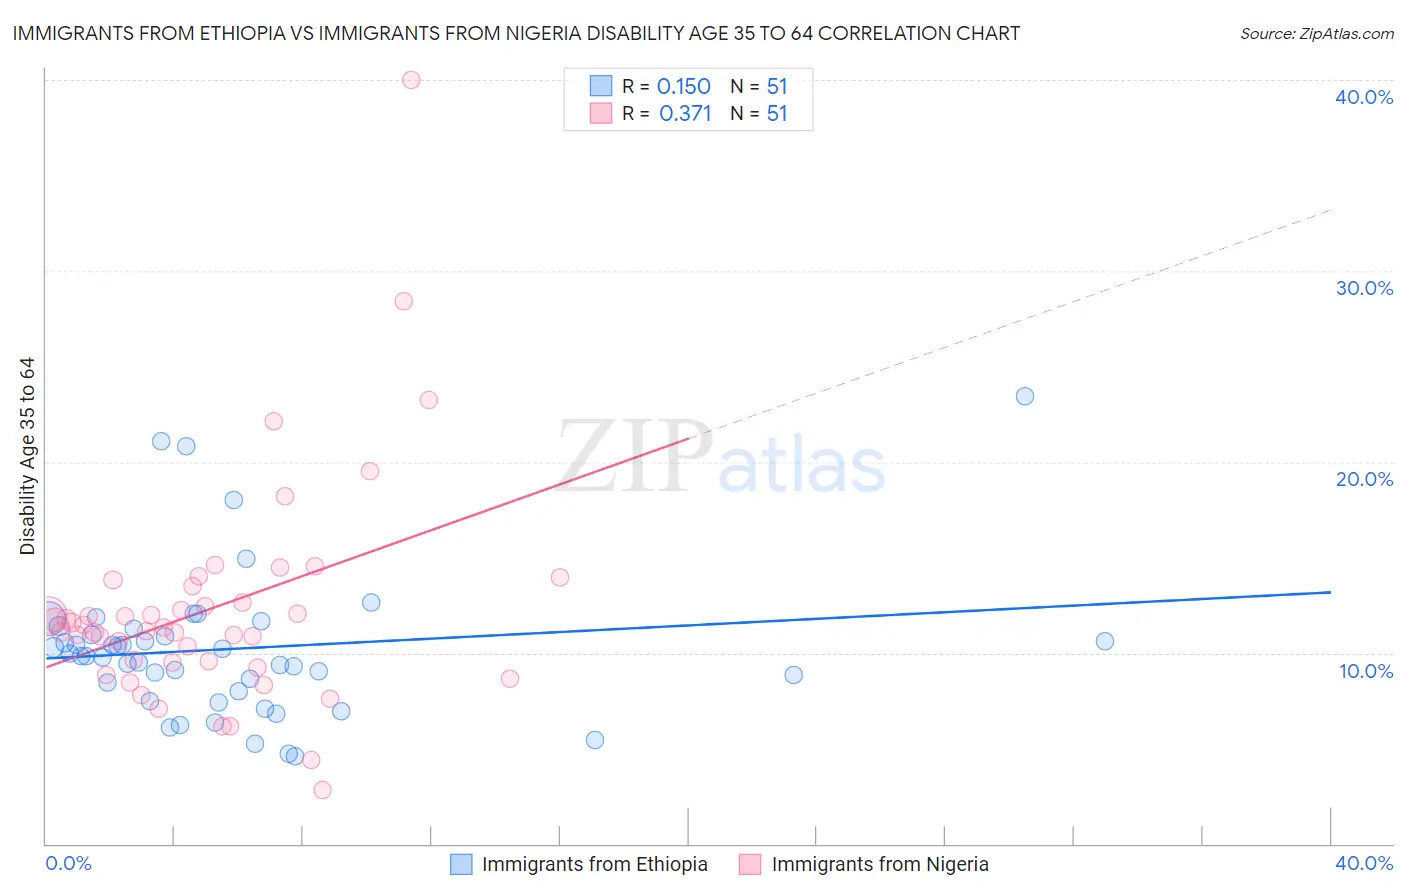 Immigrants from Ethiopia vs Immigrants from Nigeria Disability Age 35 to 64